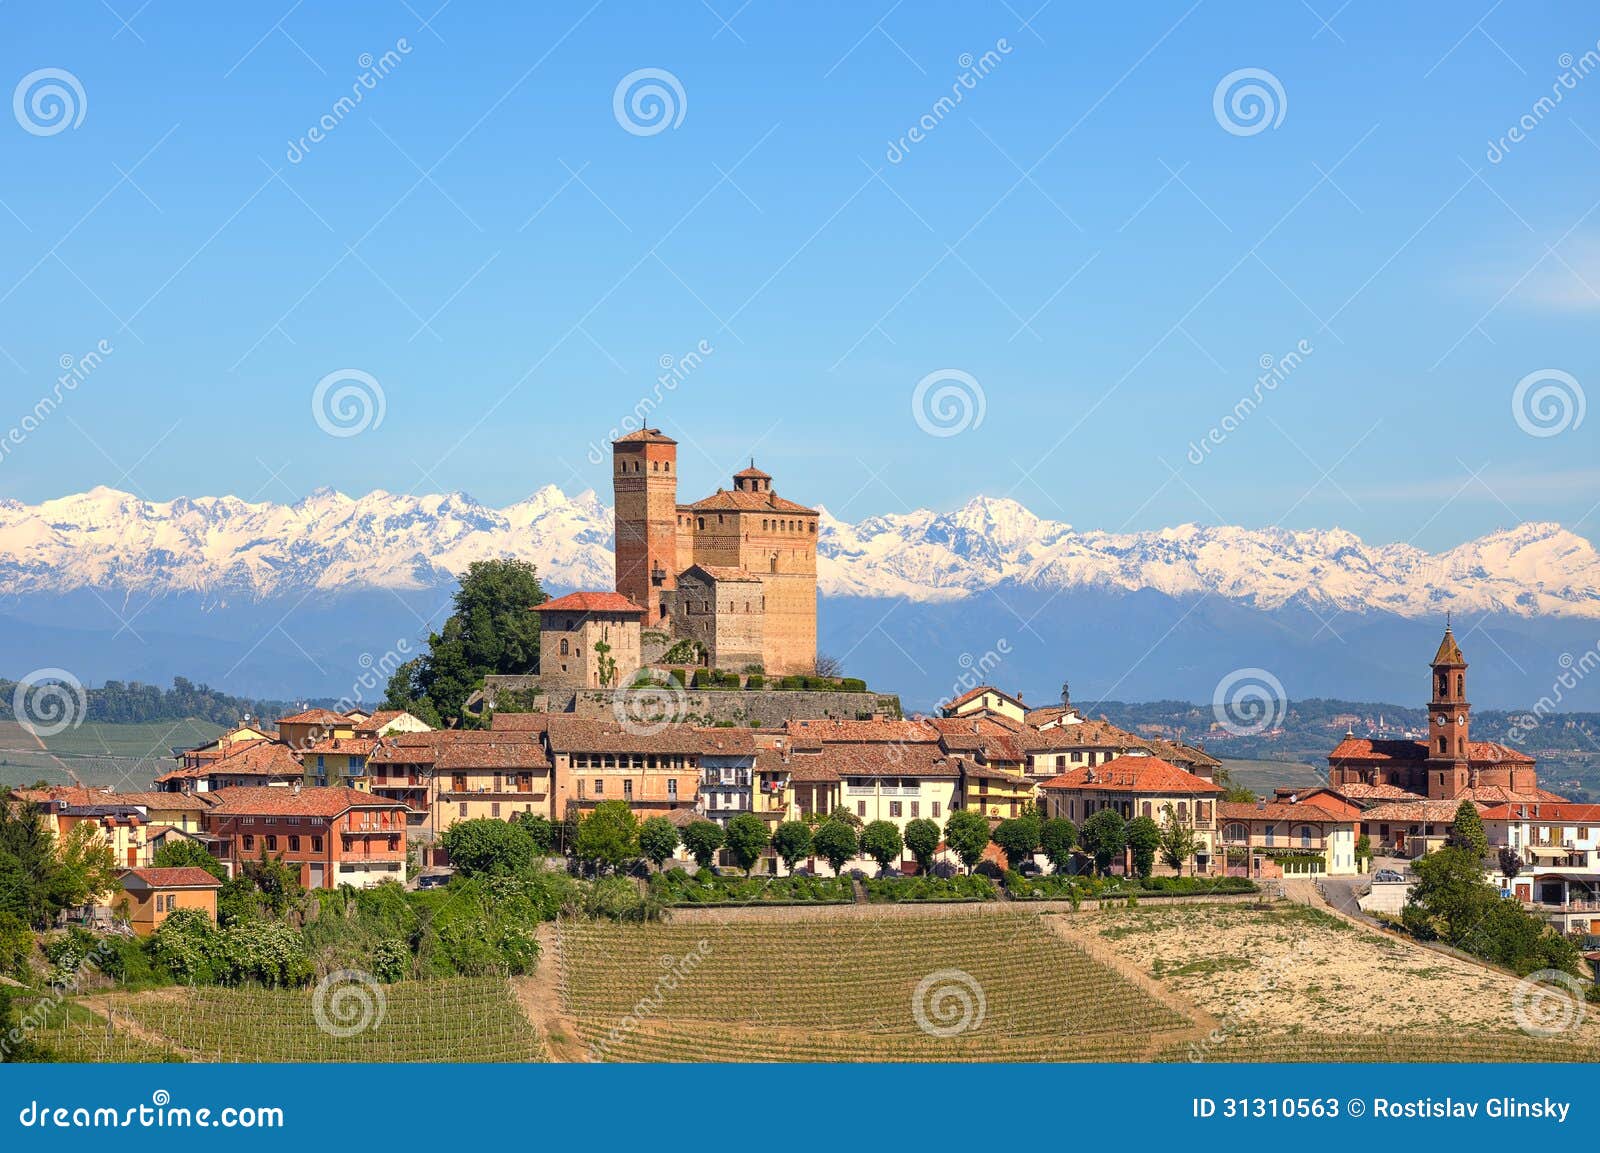 small town with old castle on the hill in piedmont, italy.